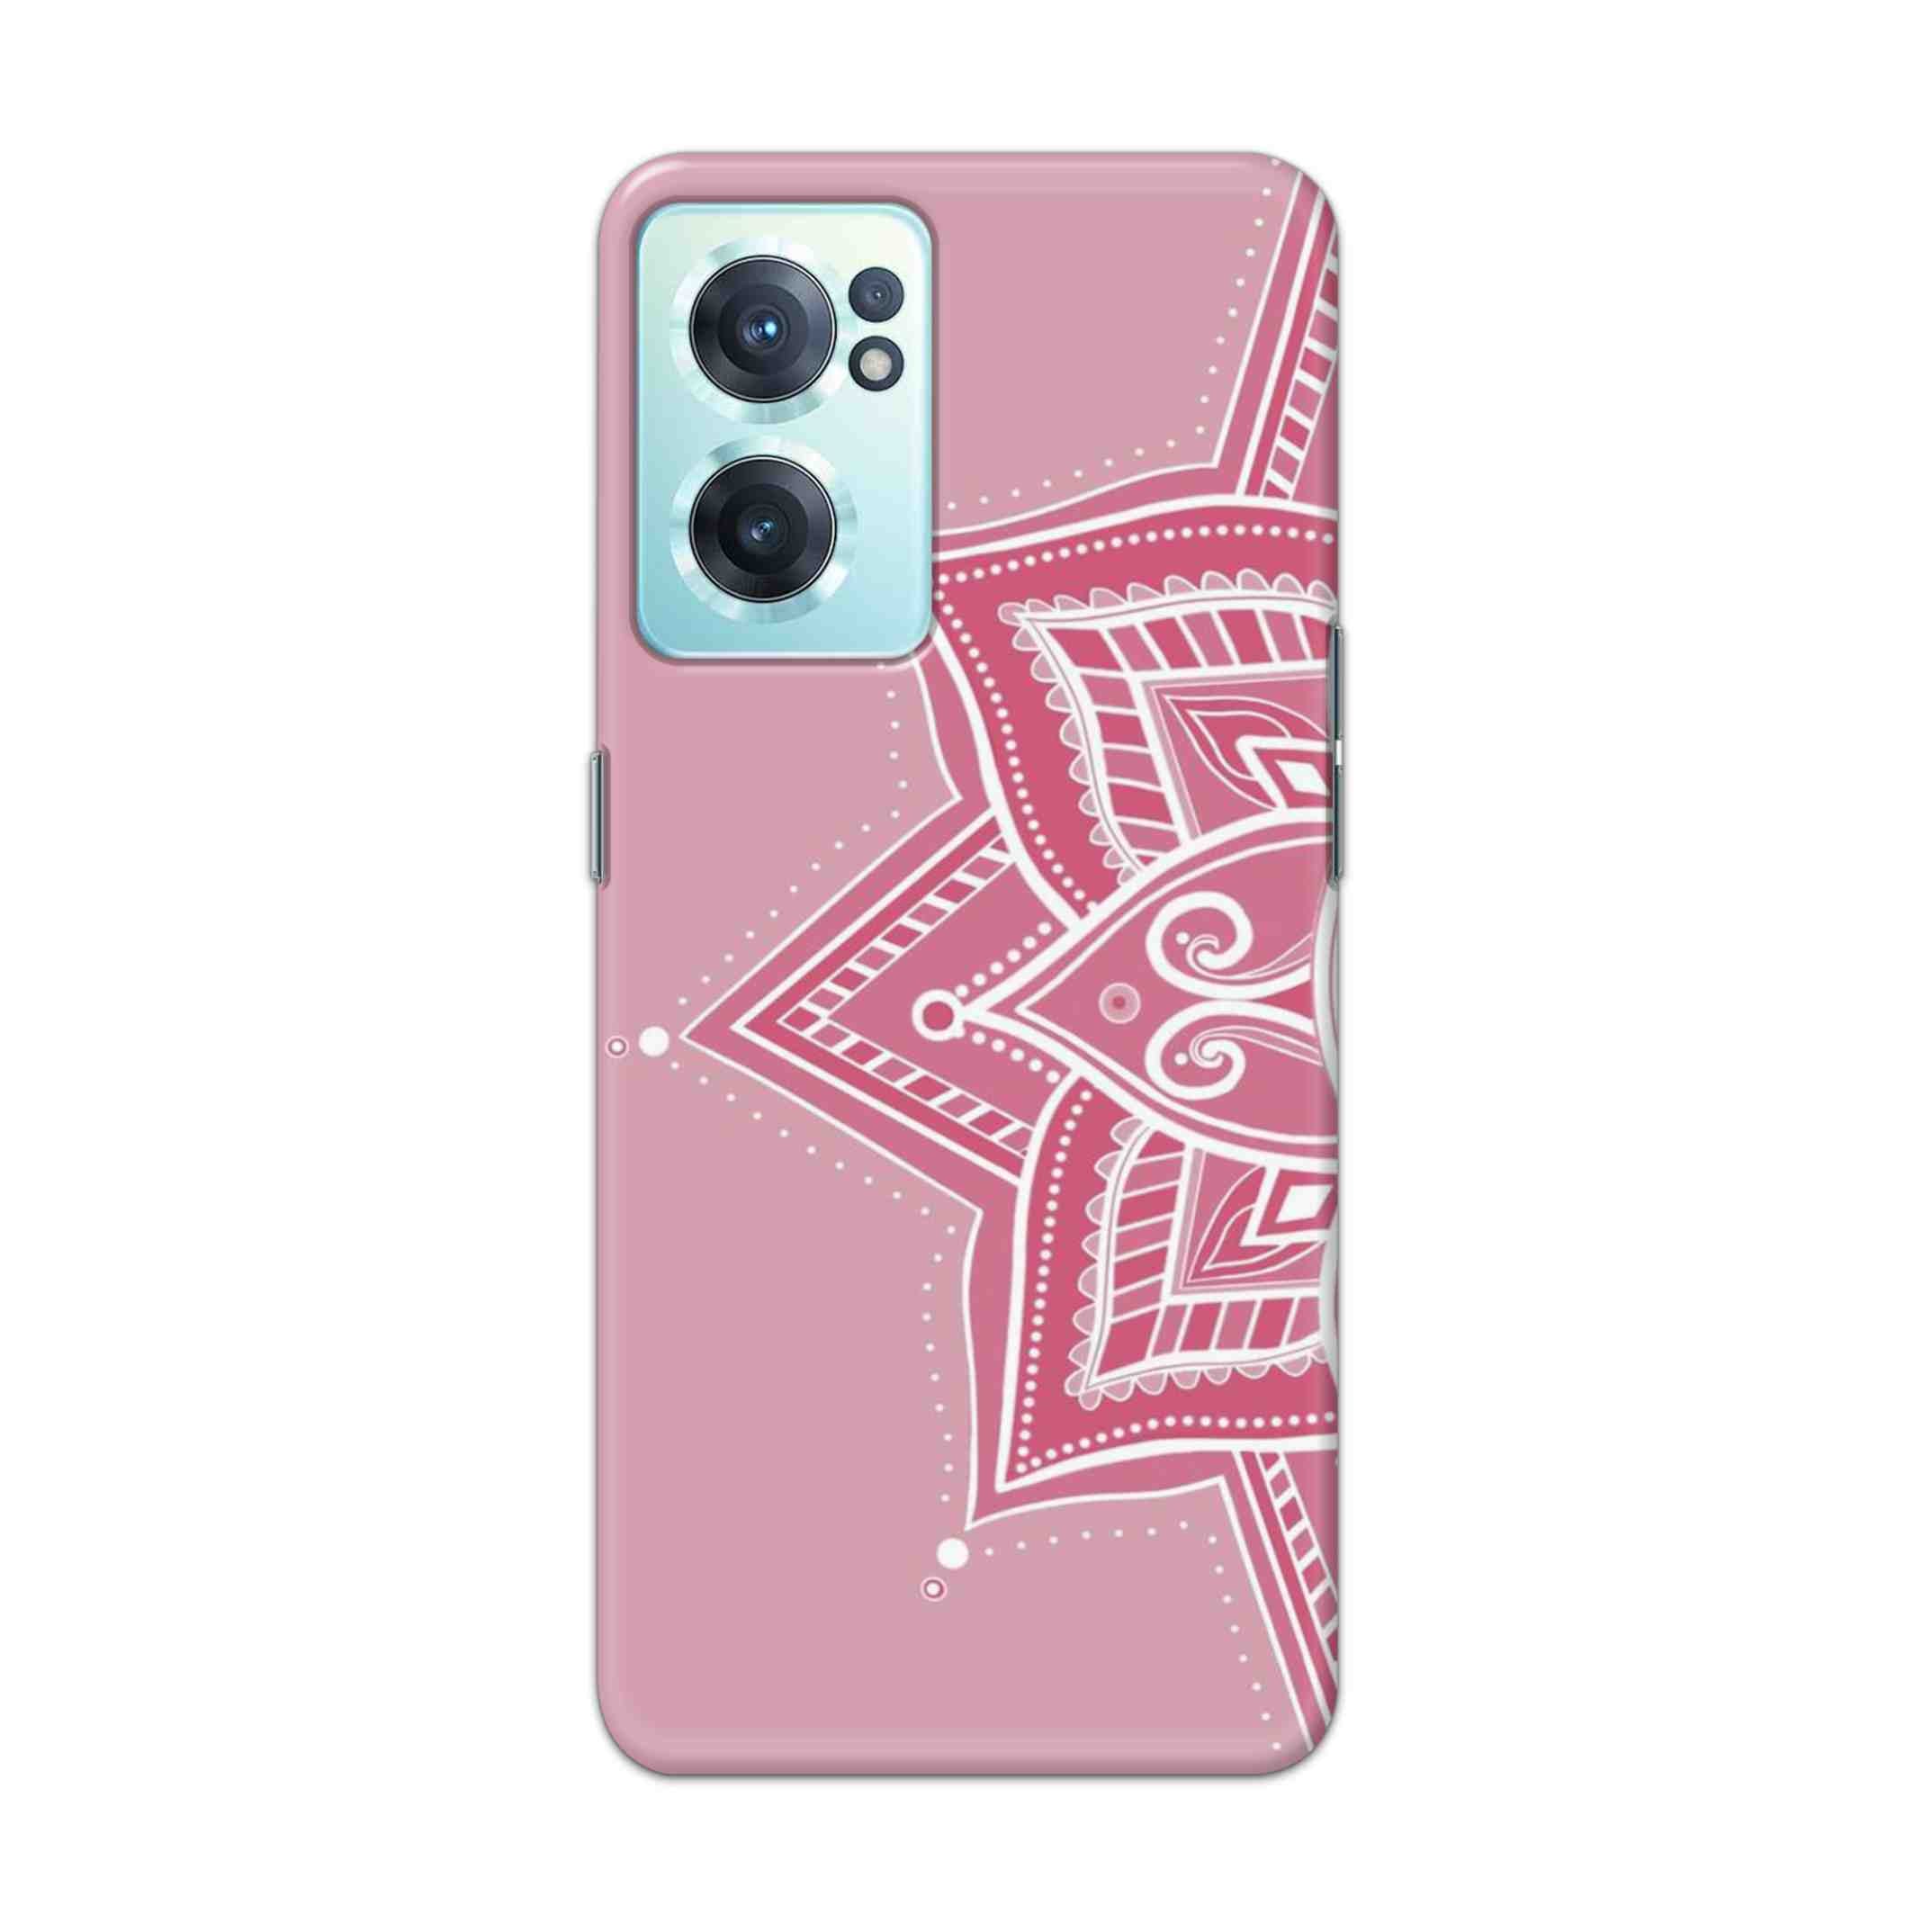 Buy Pink Rangoli Hard Back Mobile Phone Case Cover For OnePlus Nord CE 2 5G Online